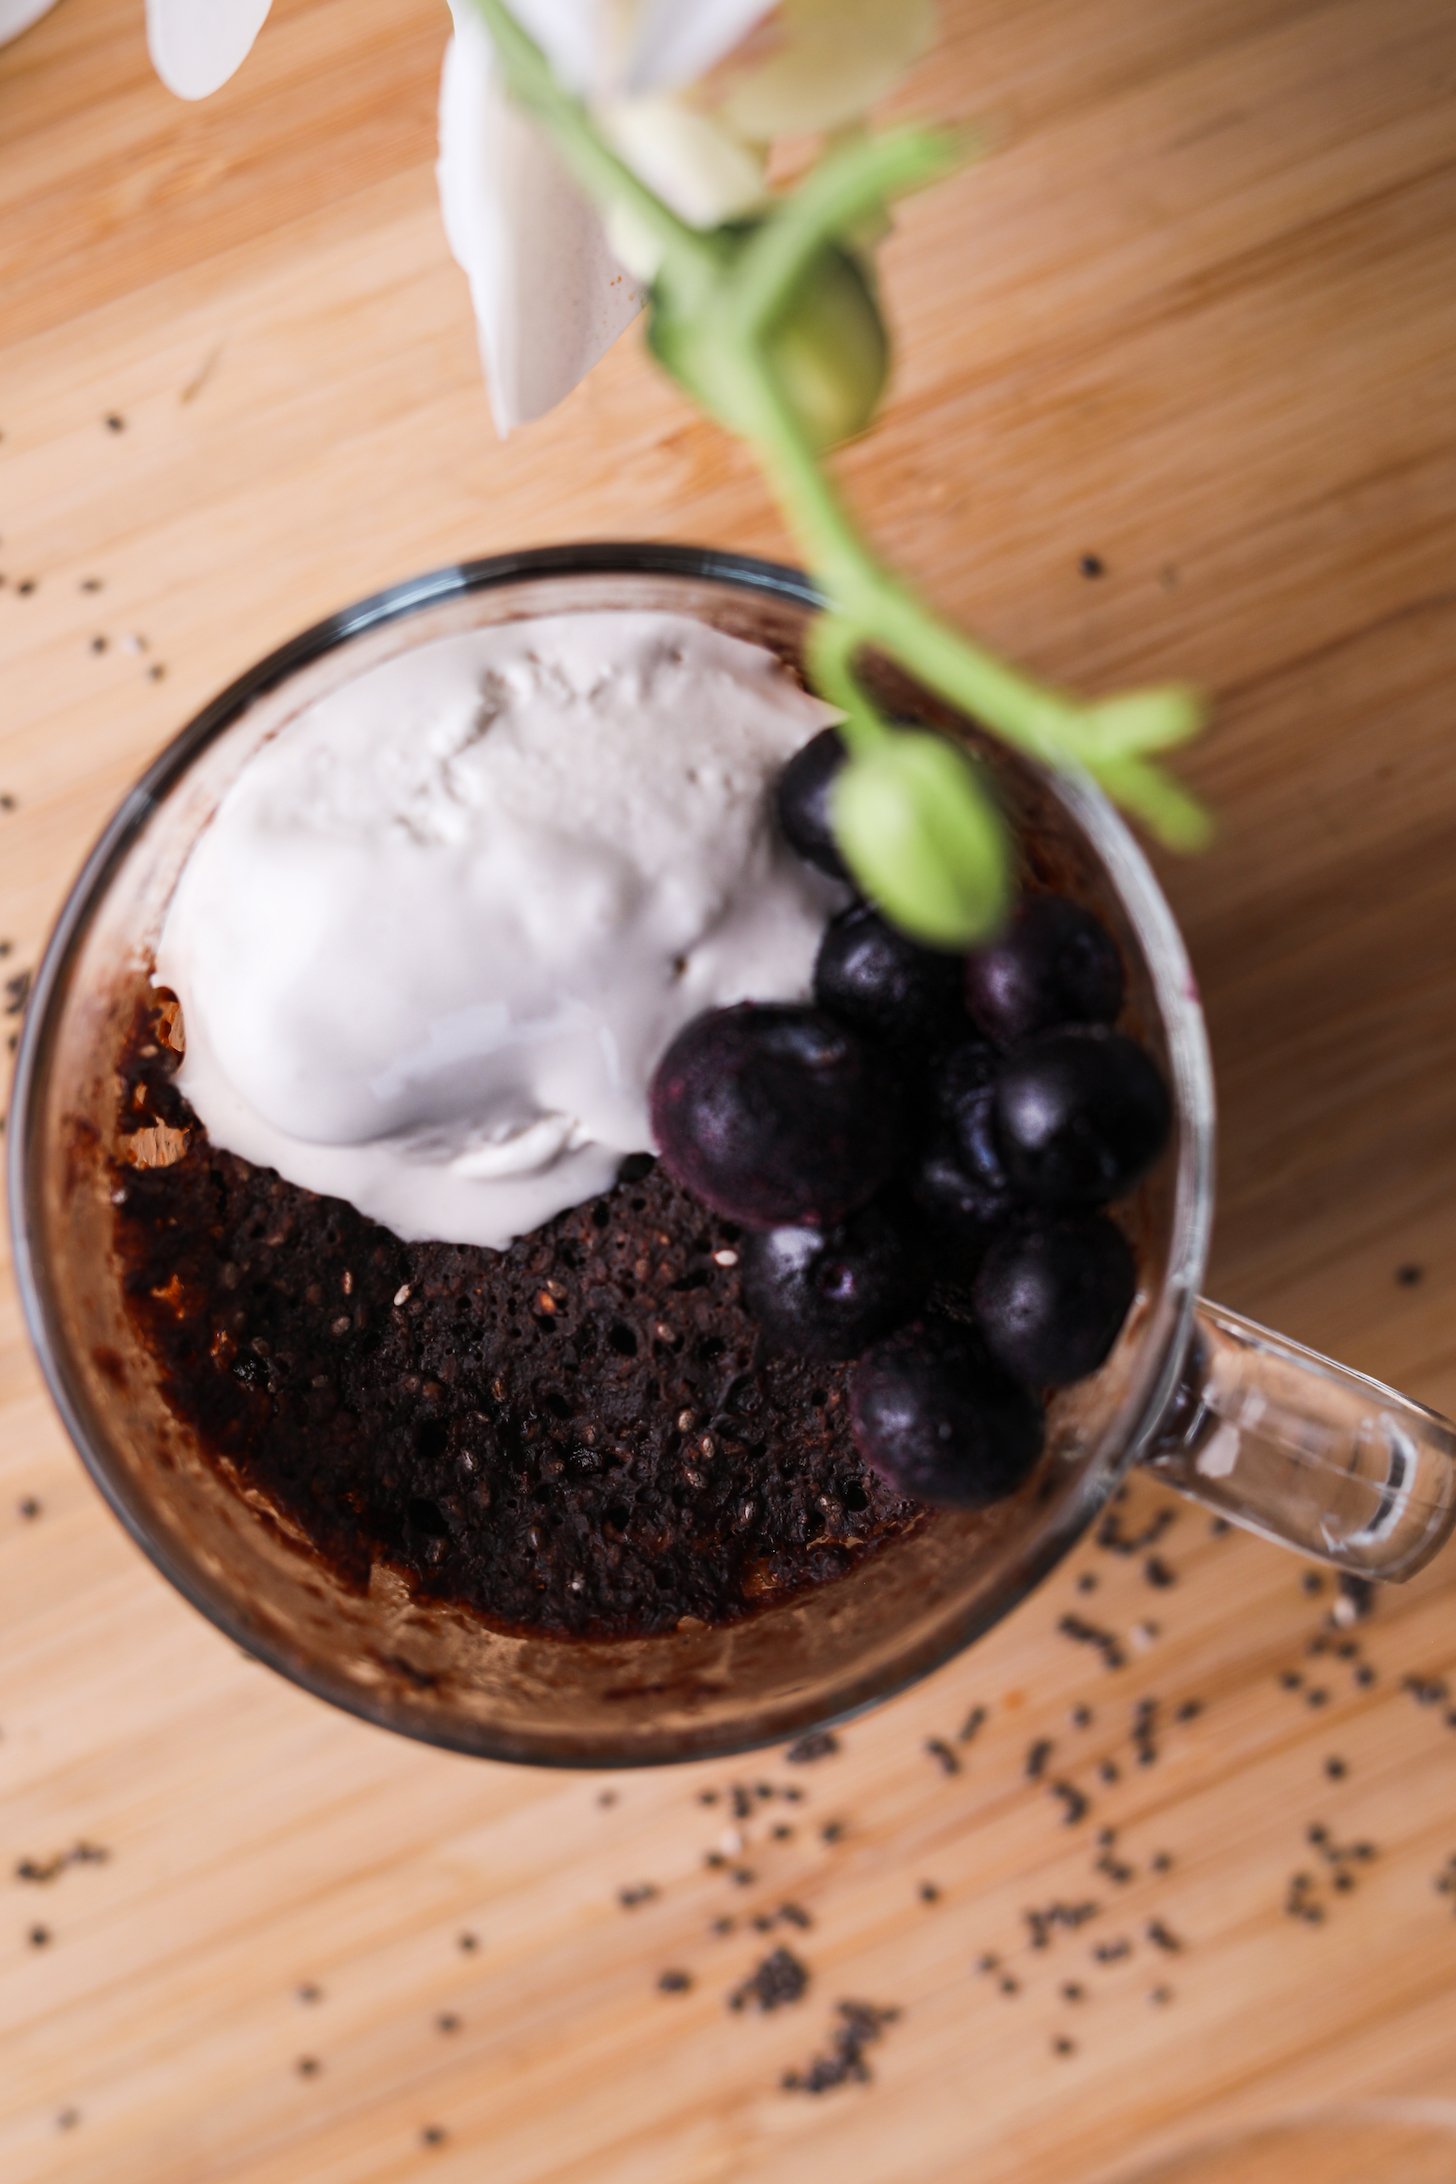 A mug of chocolate cake topped with ice cream and blueberries.